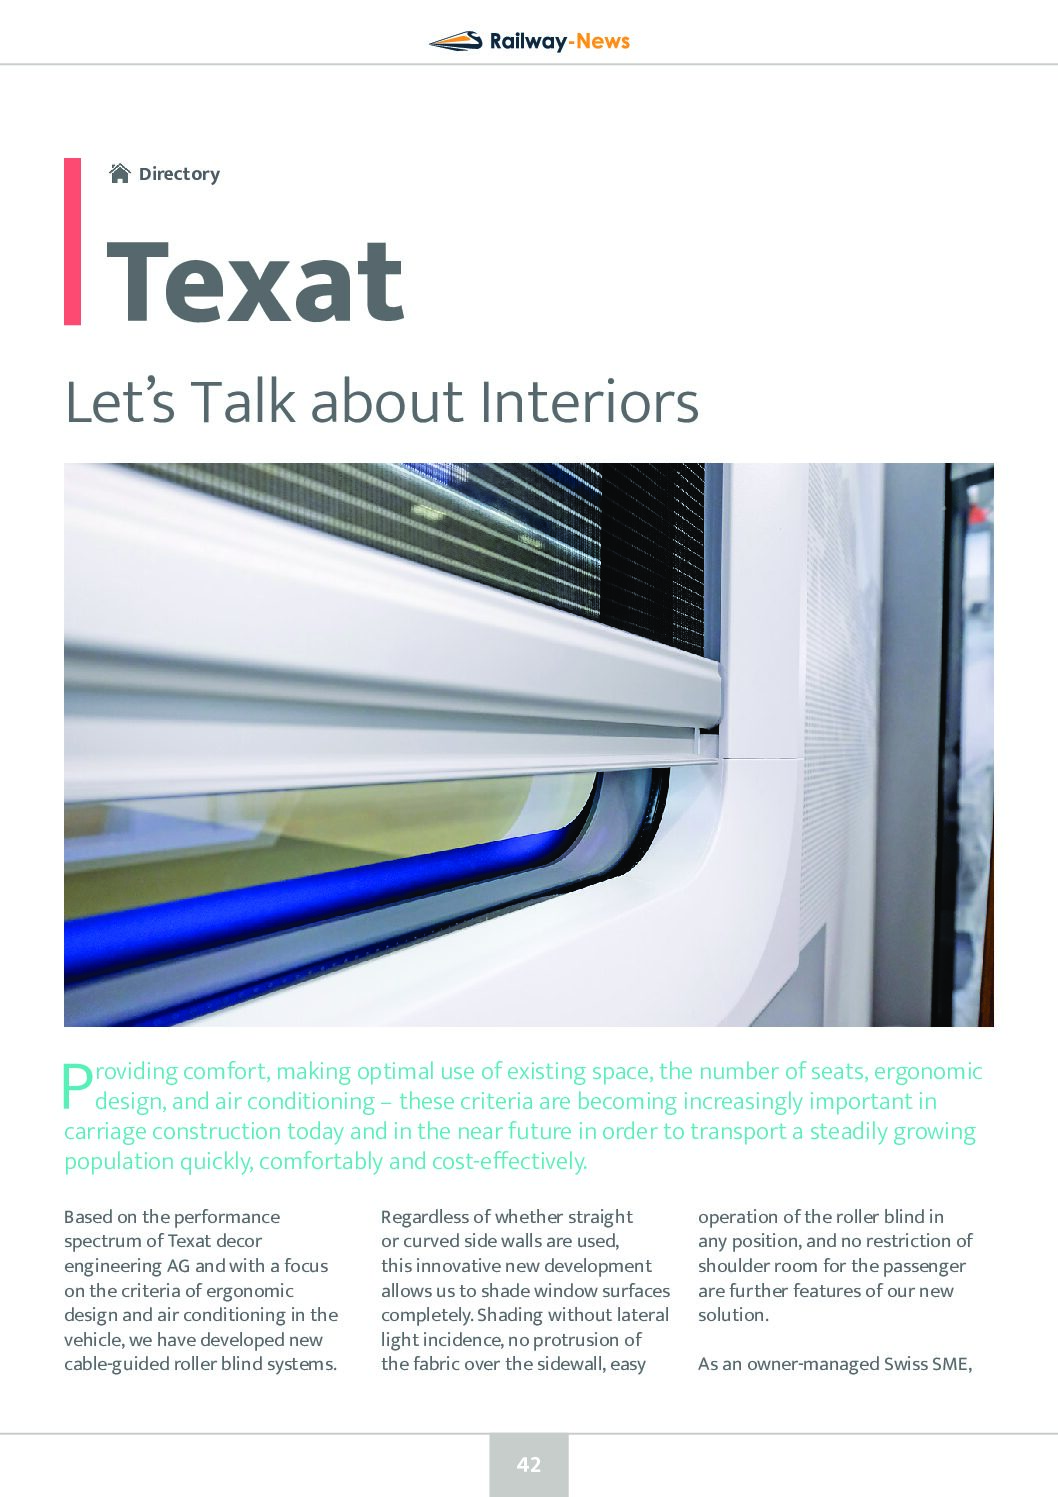 Texat decor engineering: Let’s Talk about Interiors